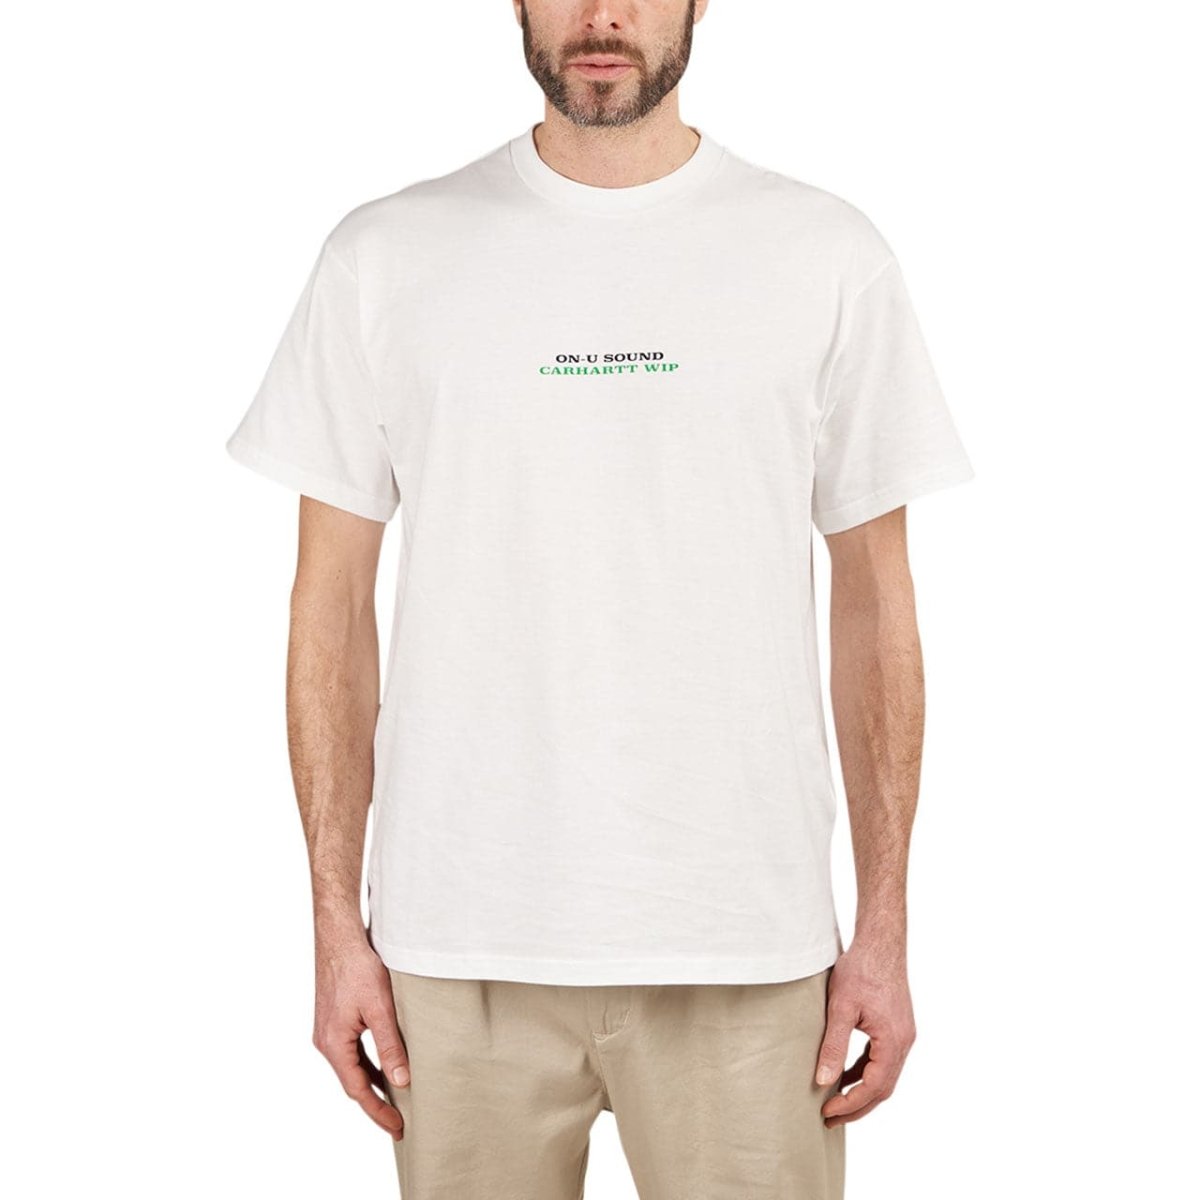 Image of Carhartt WIP x Relevant Parties S/S On U Sound T-Shirt (White)